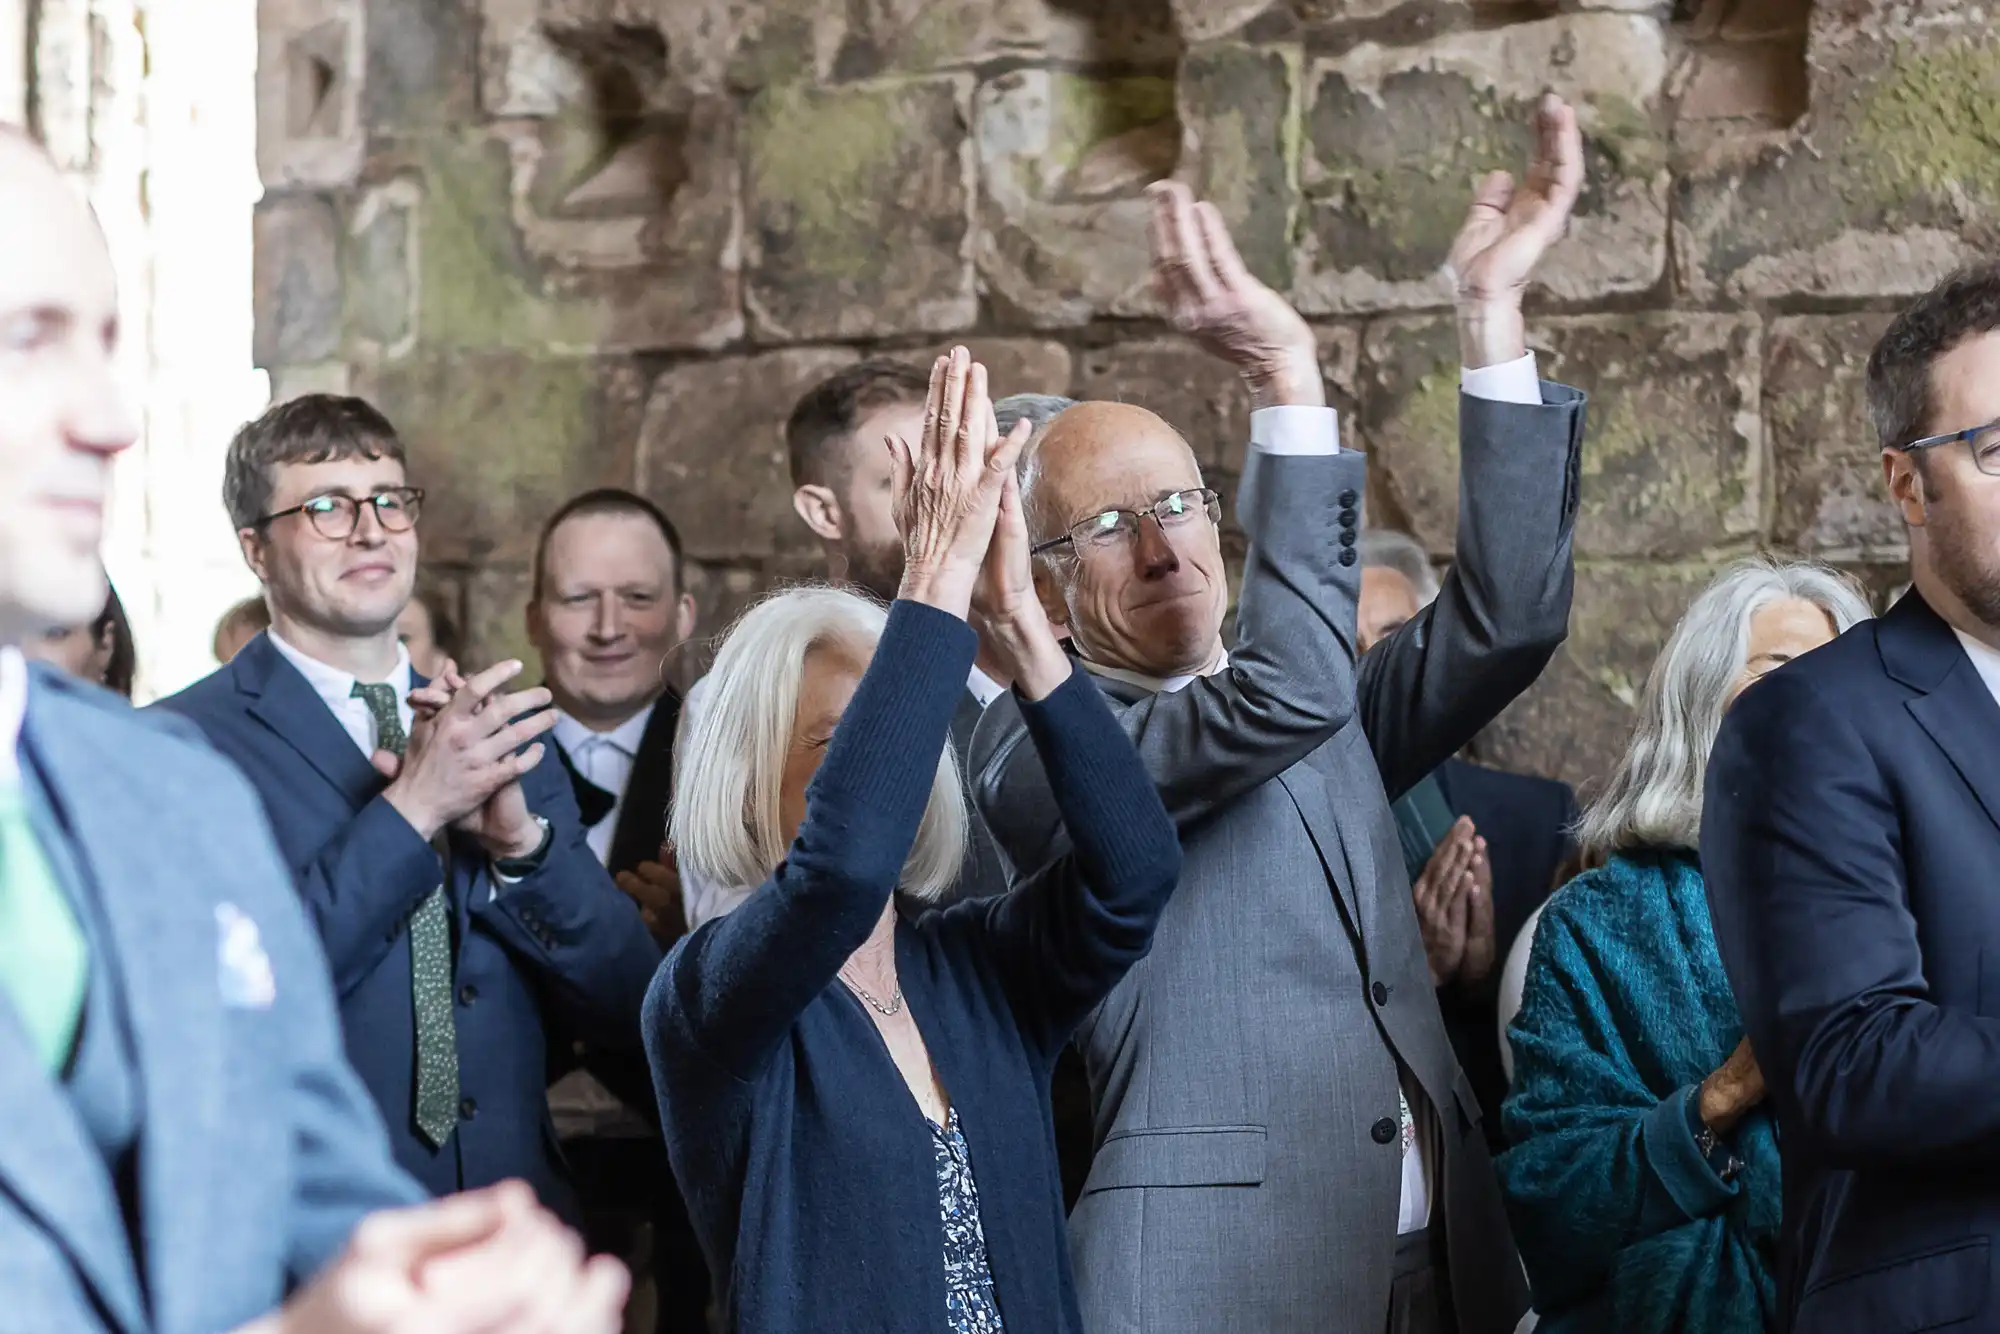 A group of people in formal attire stands inside a stone building, clapping and raising their hands in applause.